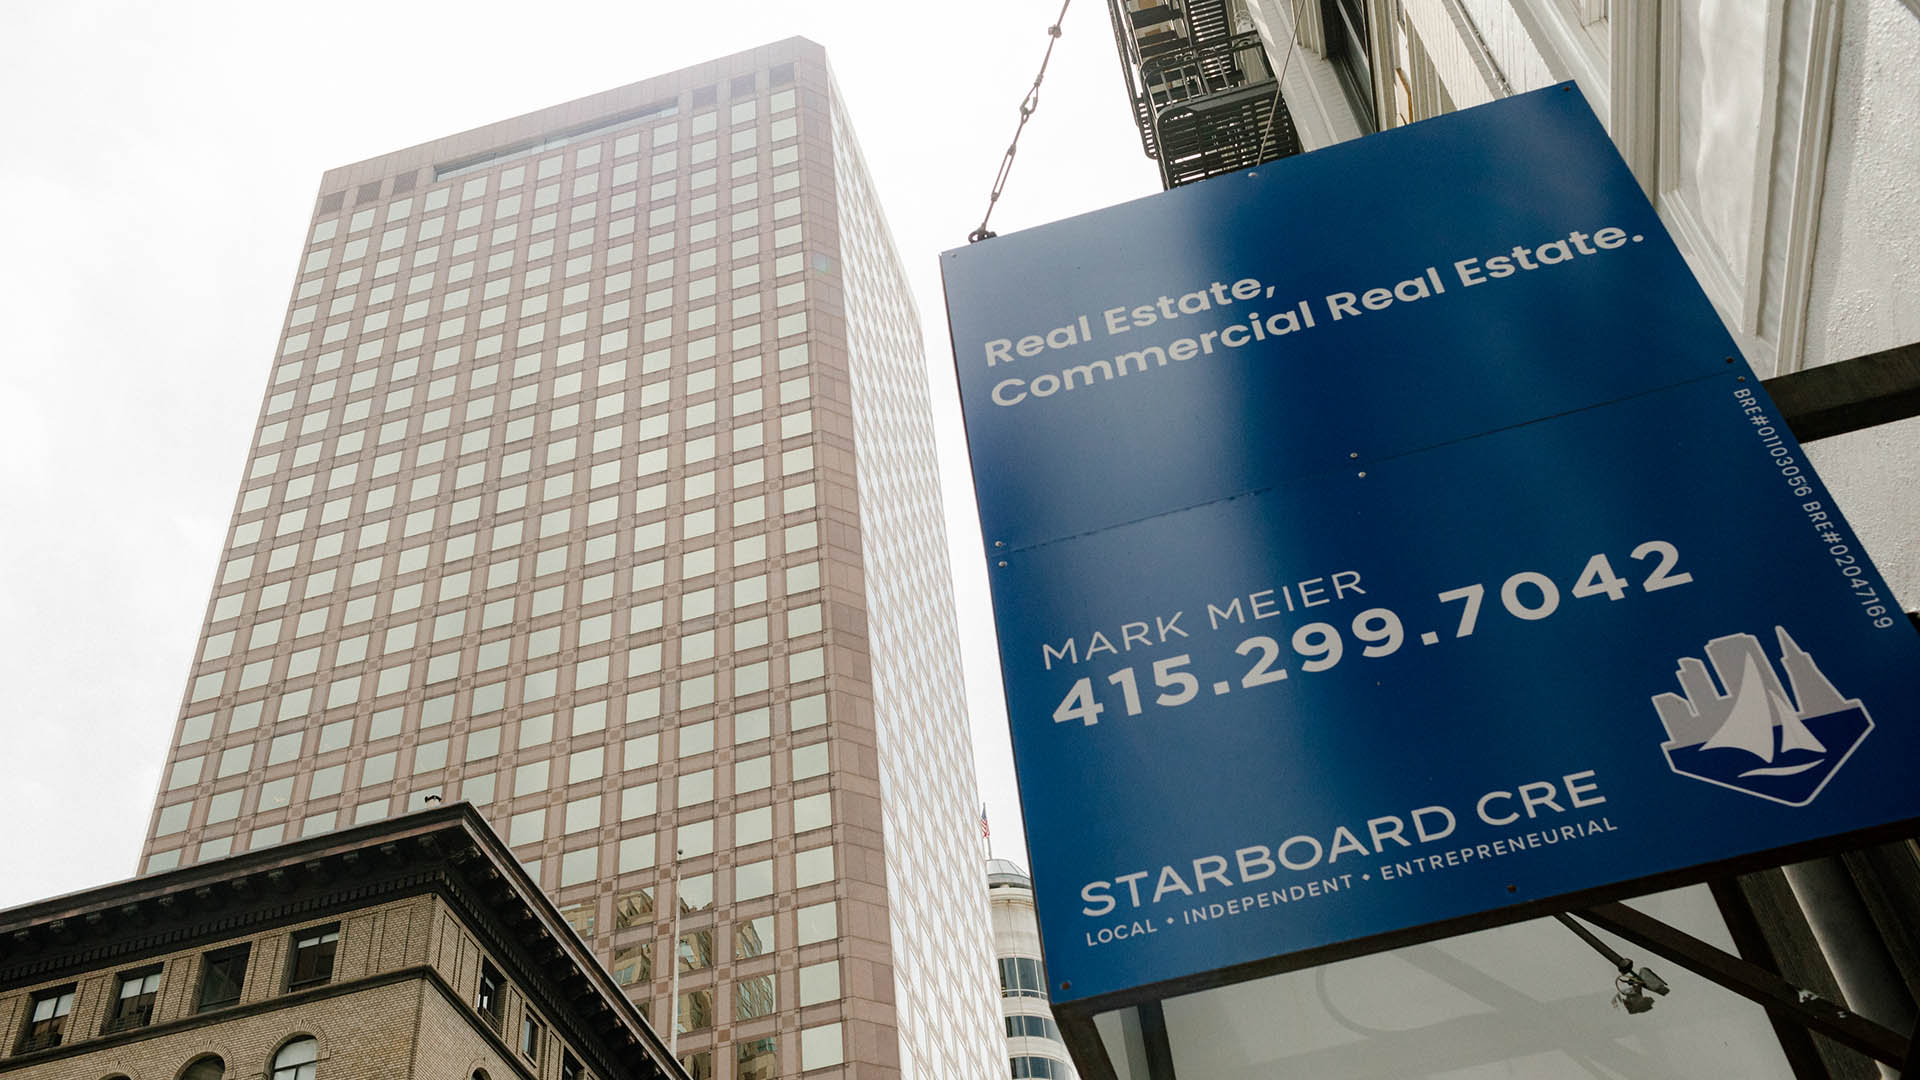 A blue "Commercial Real Estate" sign in front a gray skyscraper